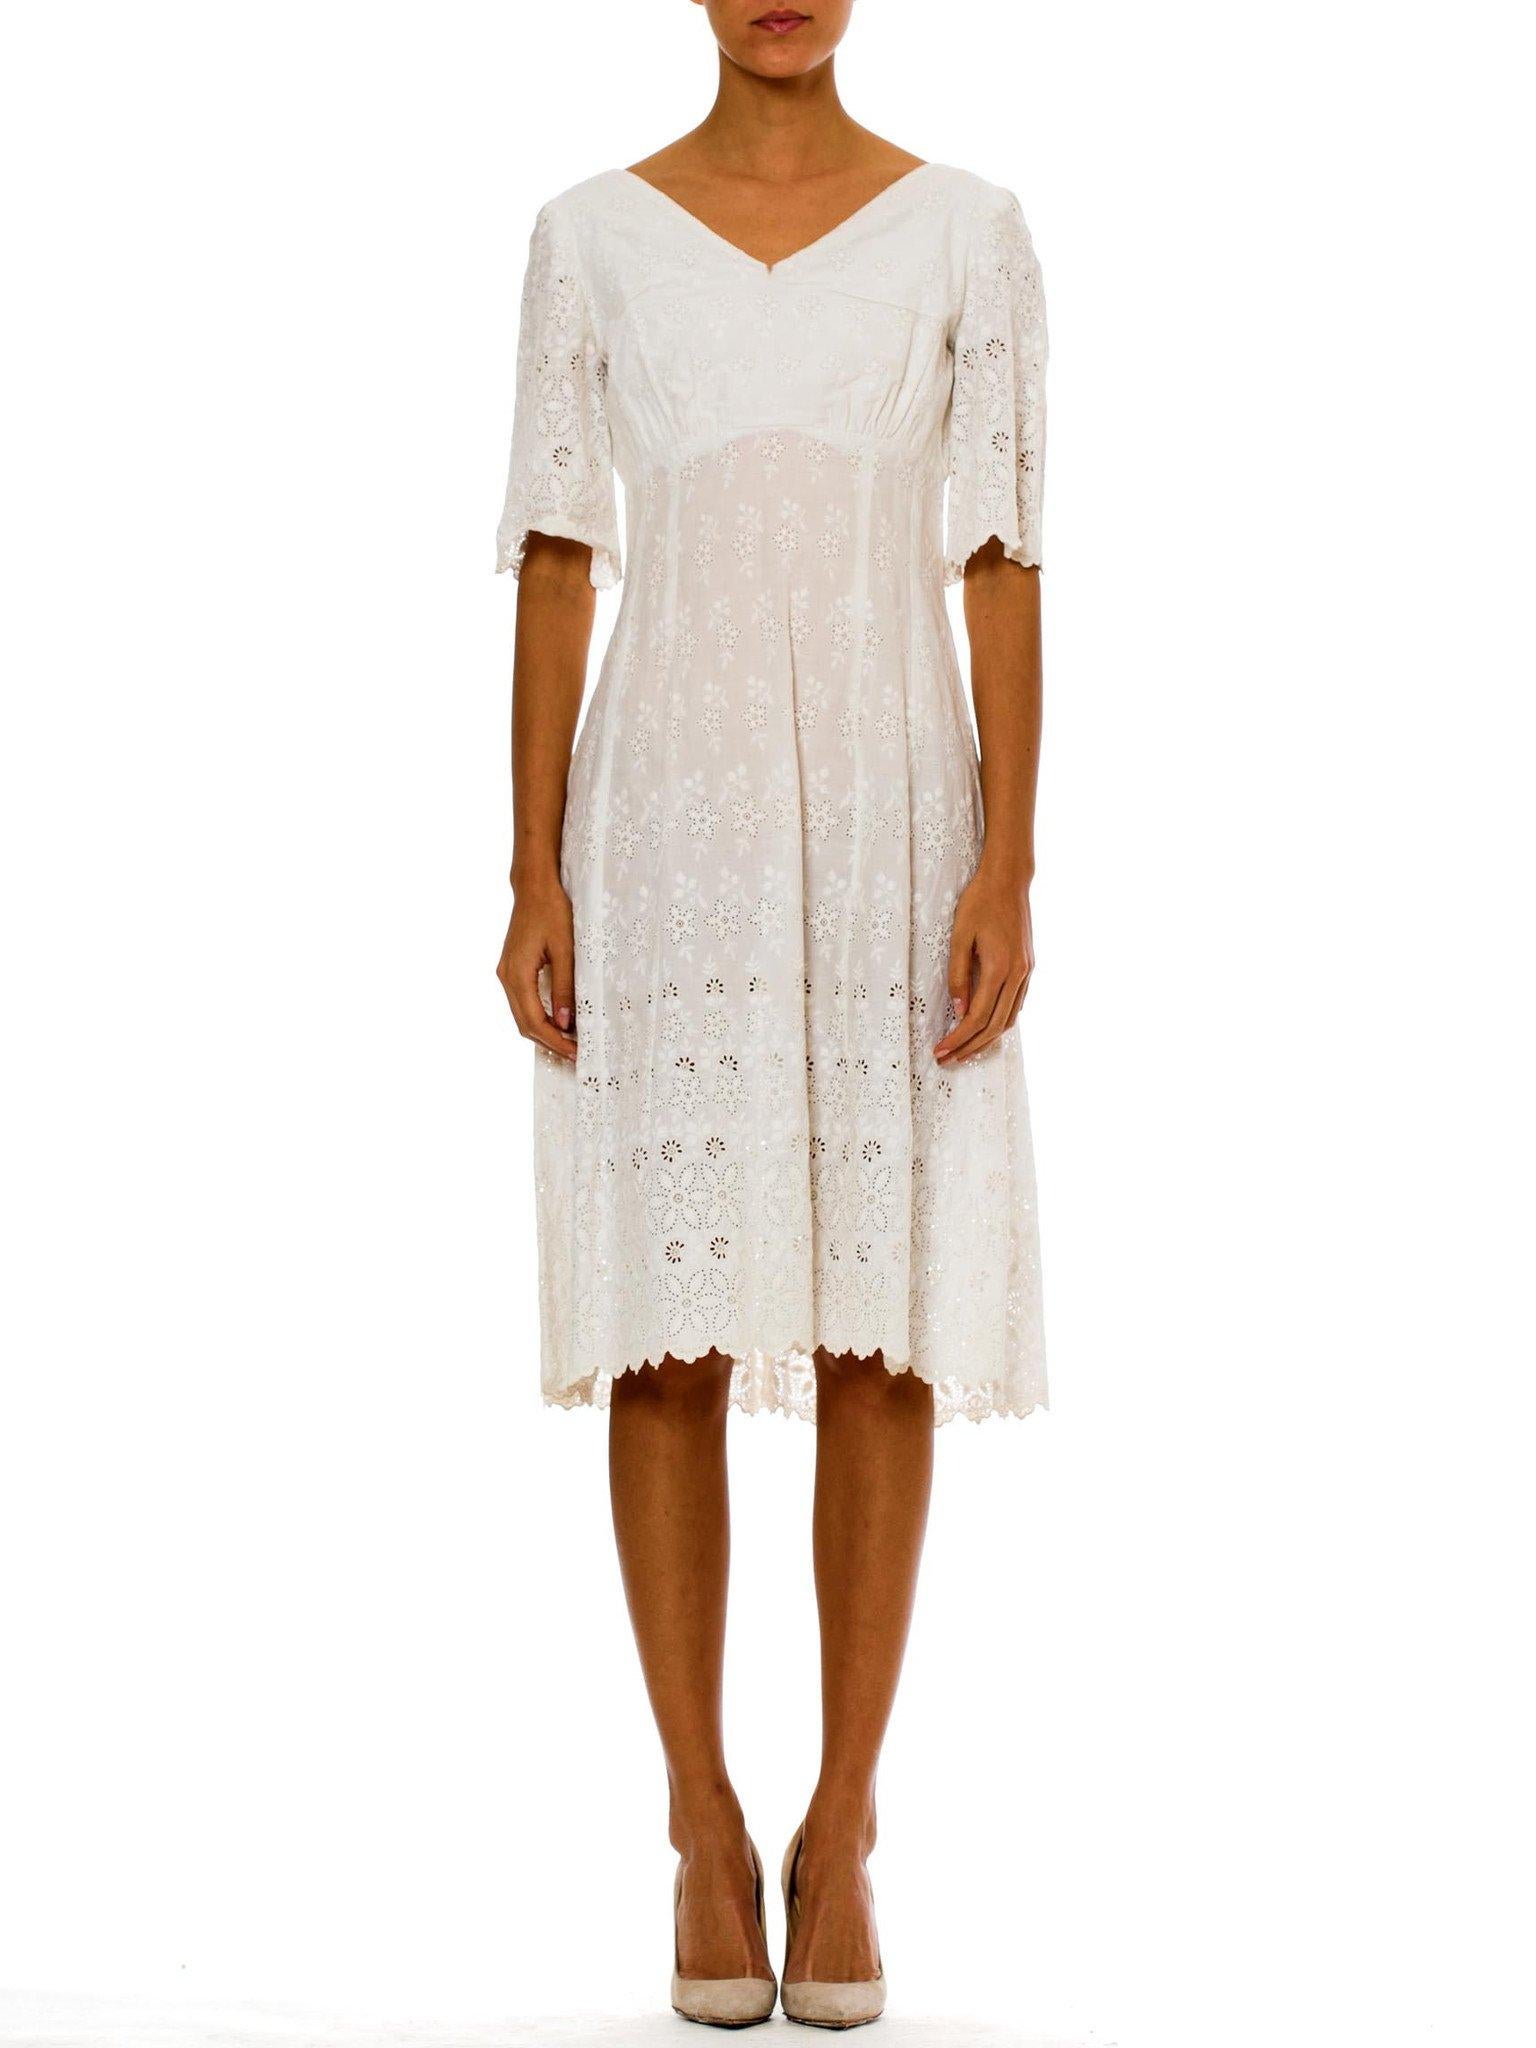 Victorian White Organic Cotton Dress With Floral Eyelet Embroidery & Scalloped Hem